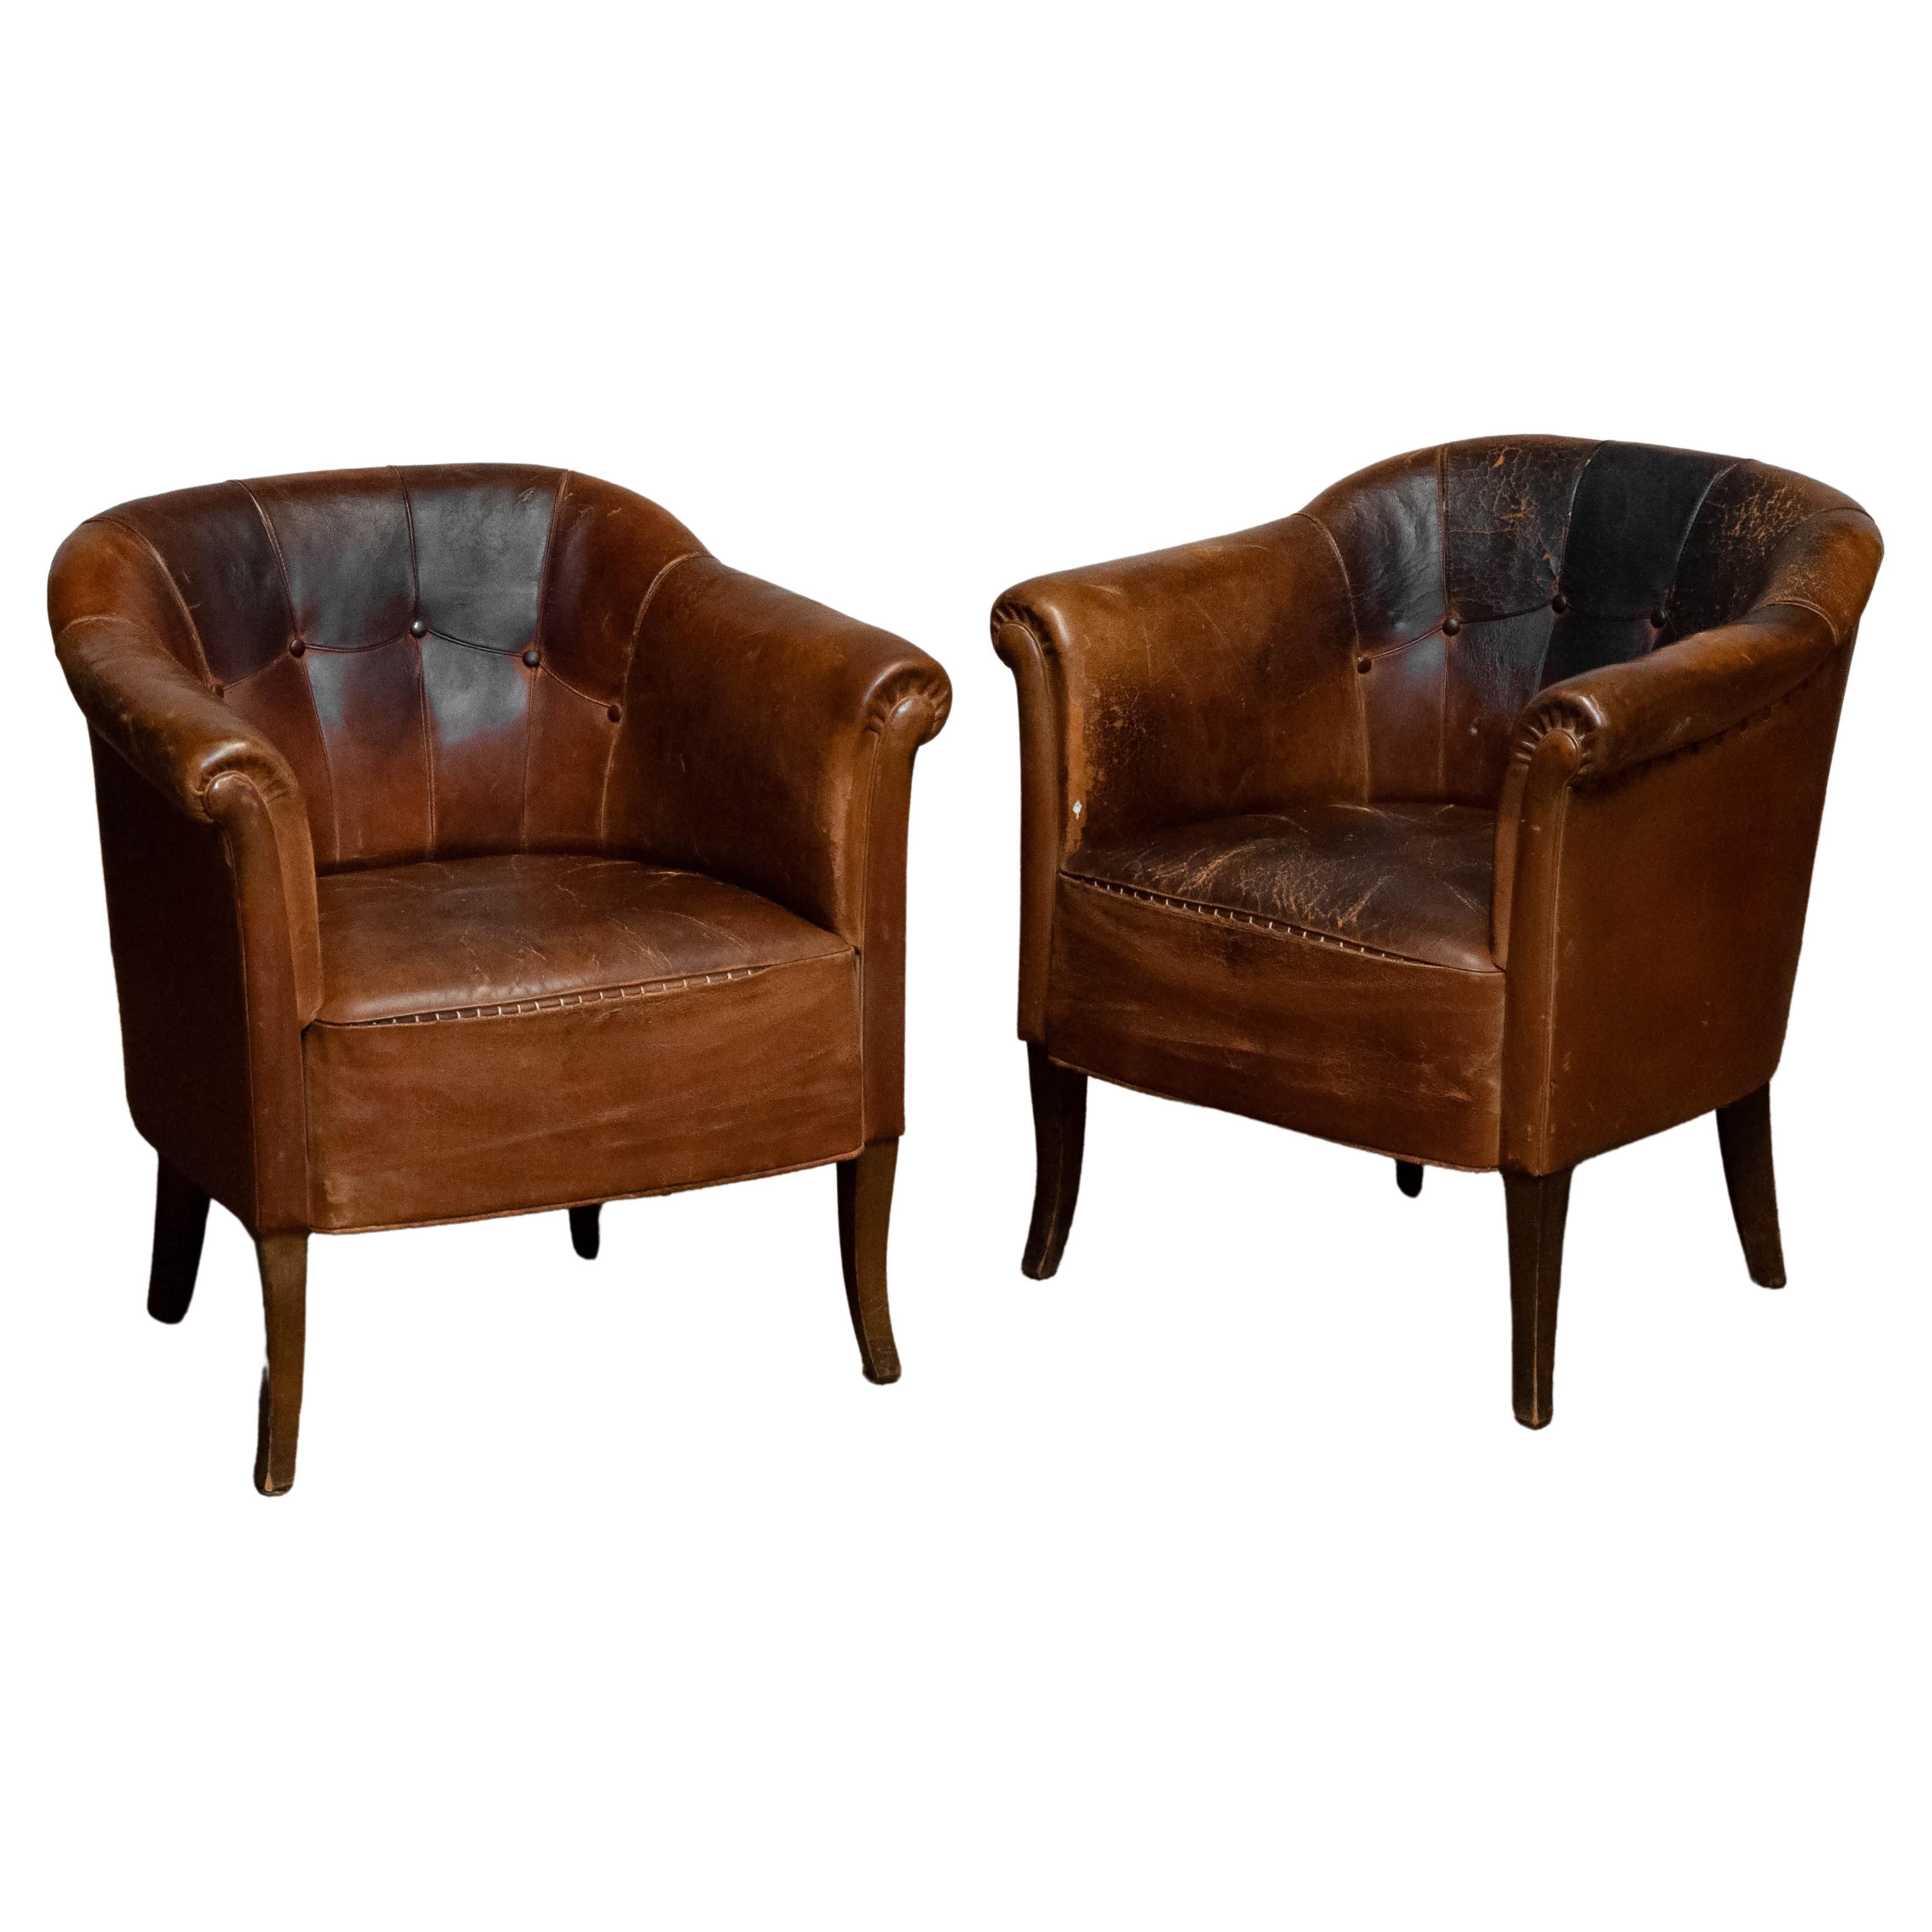 Pair Late 19th Century Swedish Tan / Brown Nailed Leather Lounge / Club Chairs